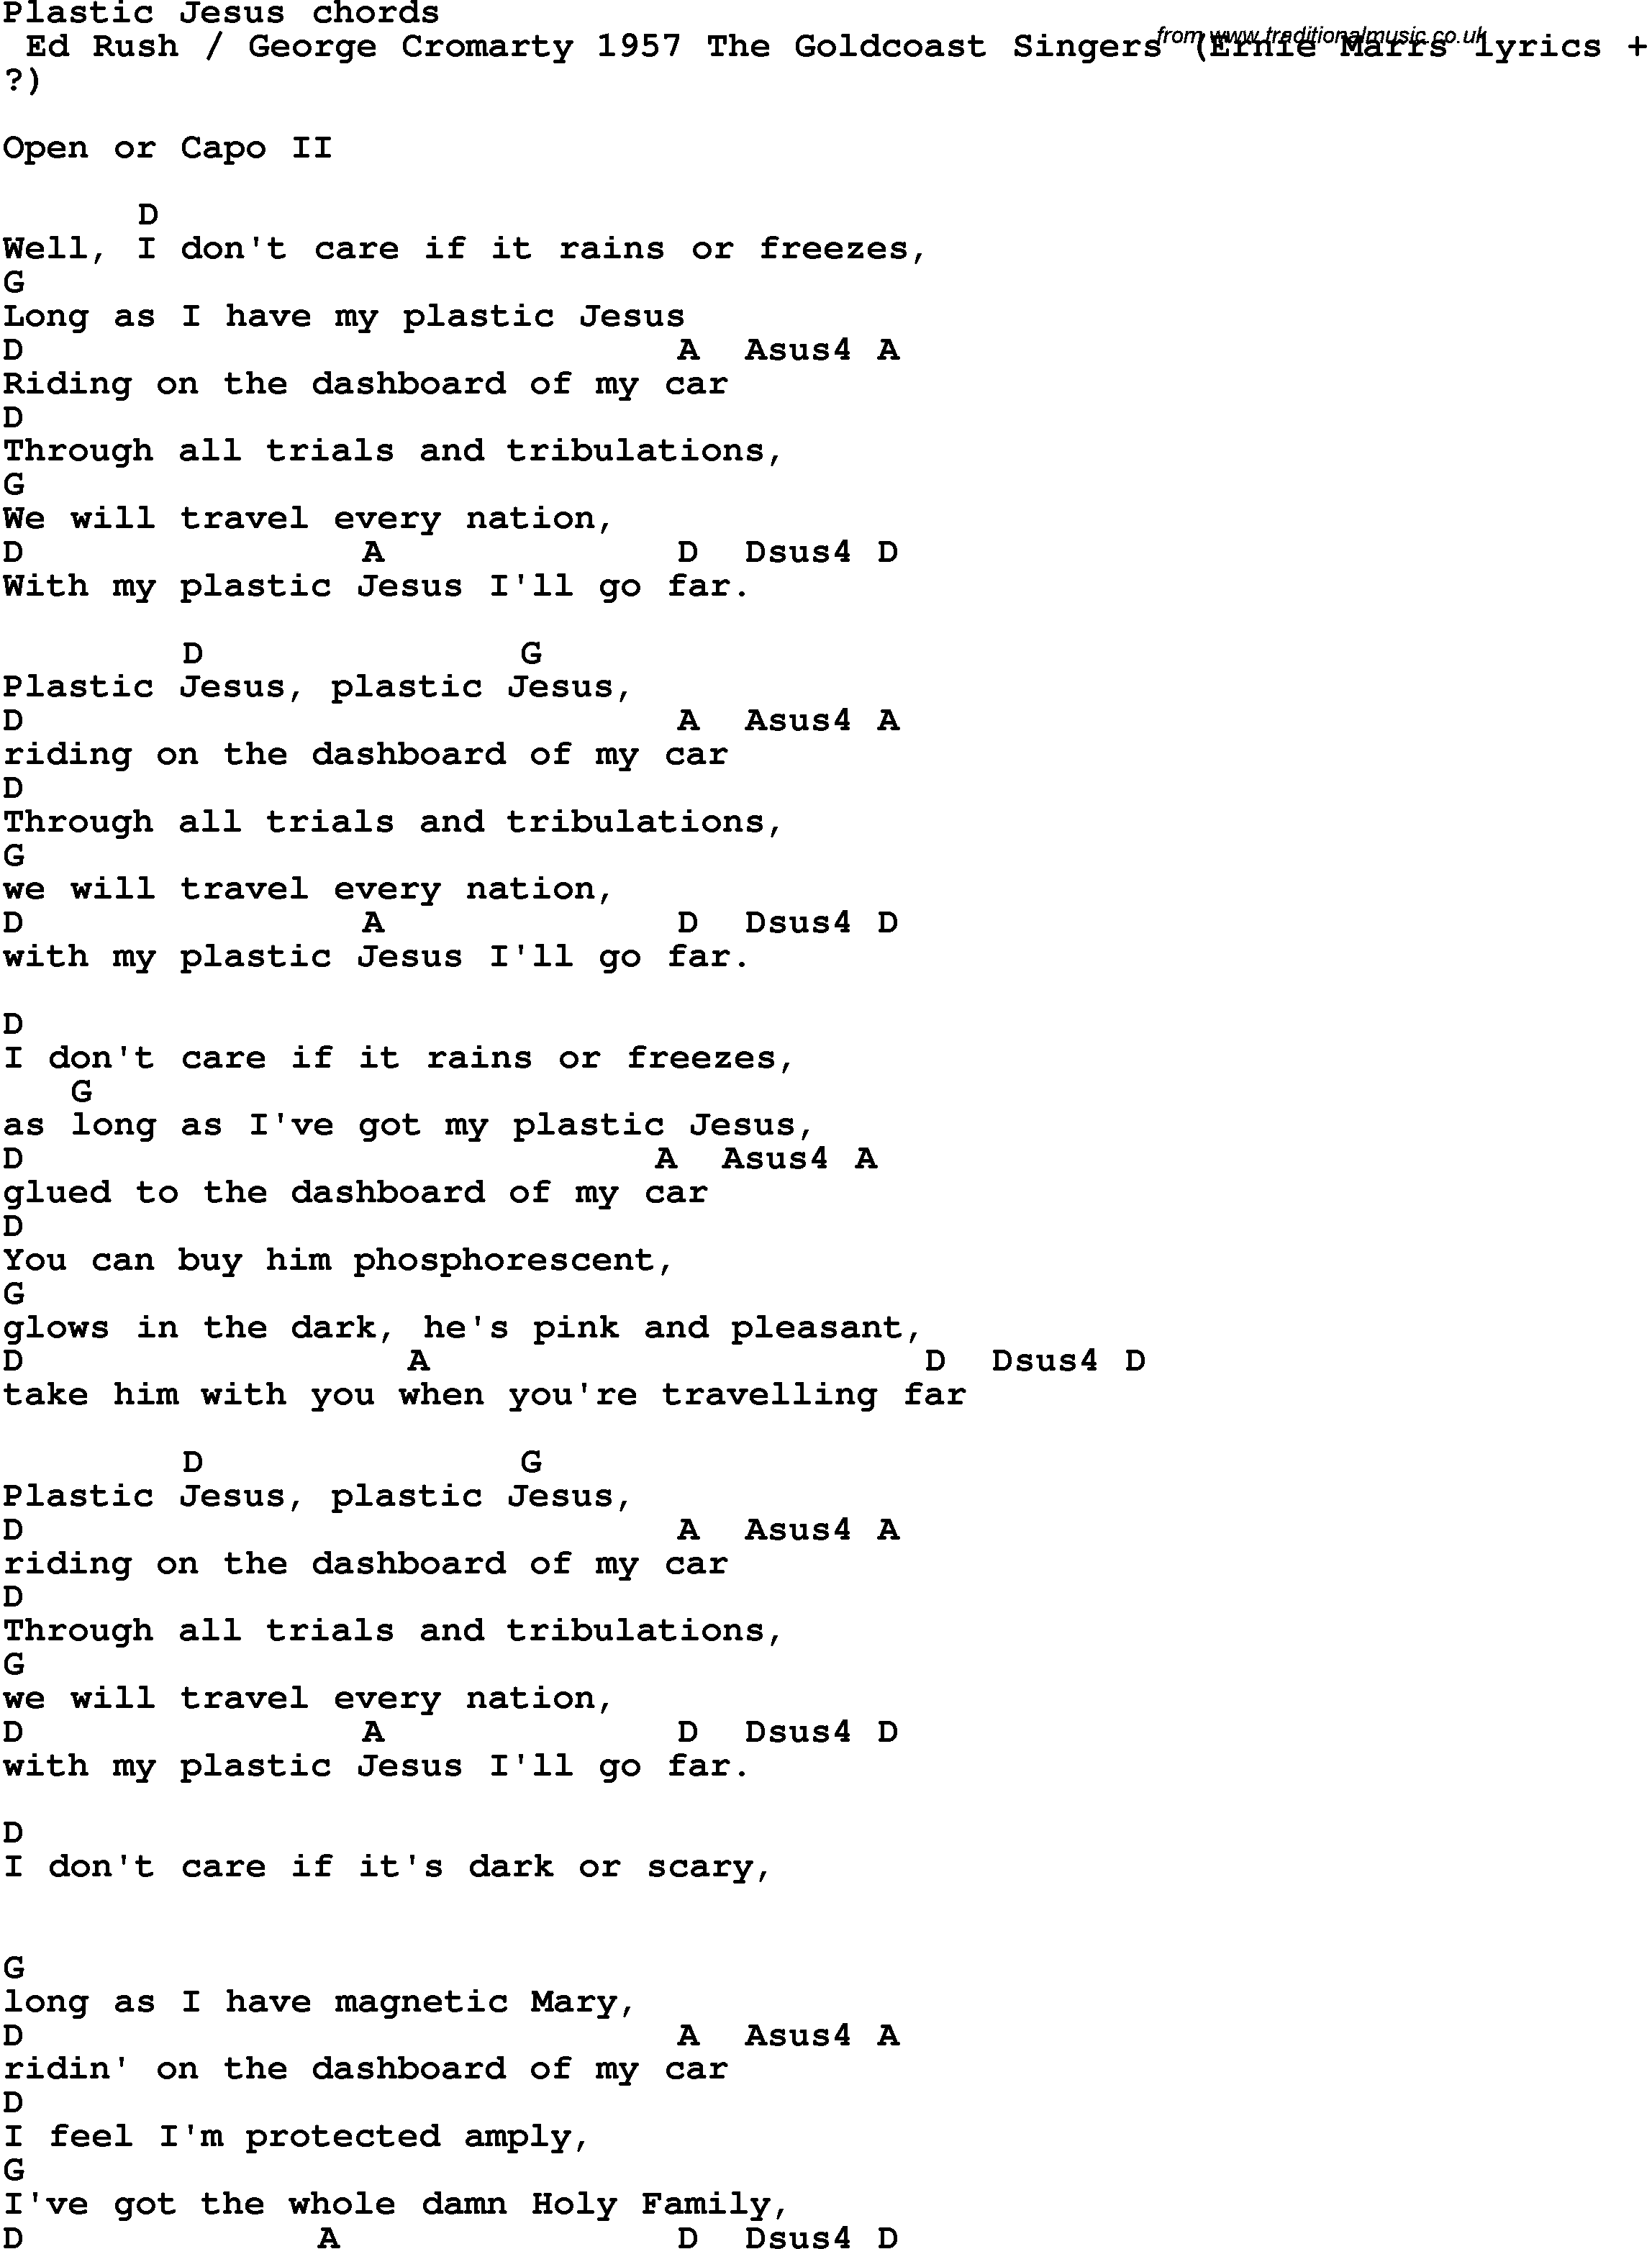 Song Lyrics with guitar chords for Plastic Jesus